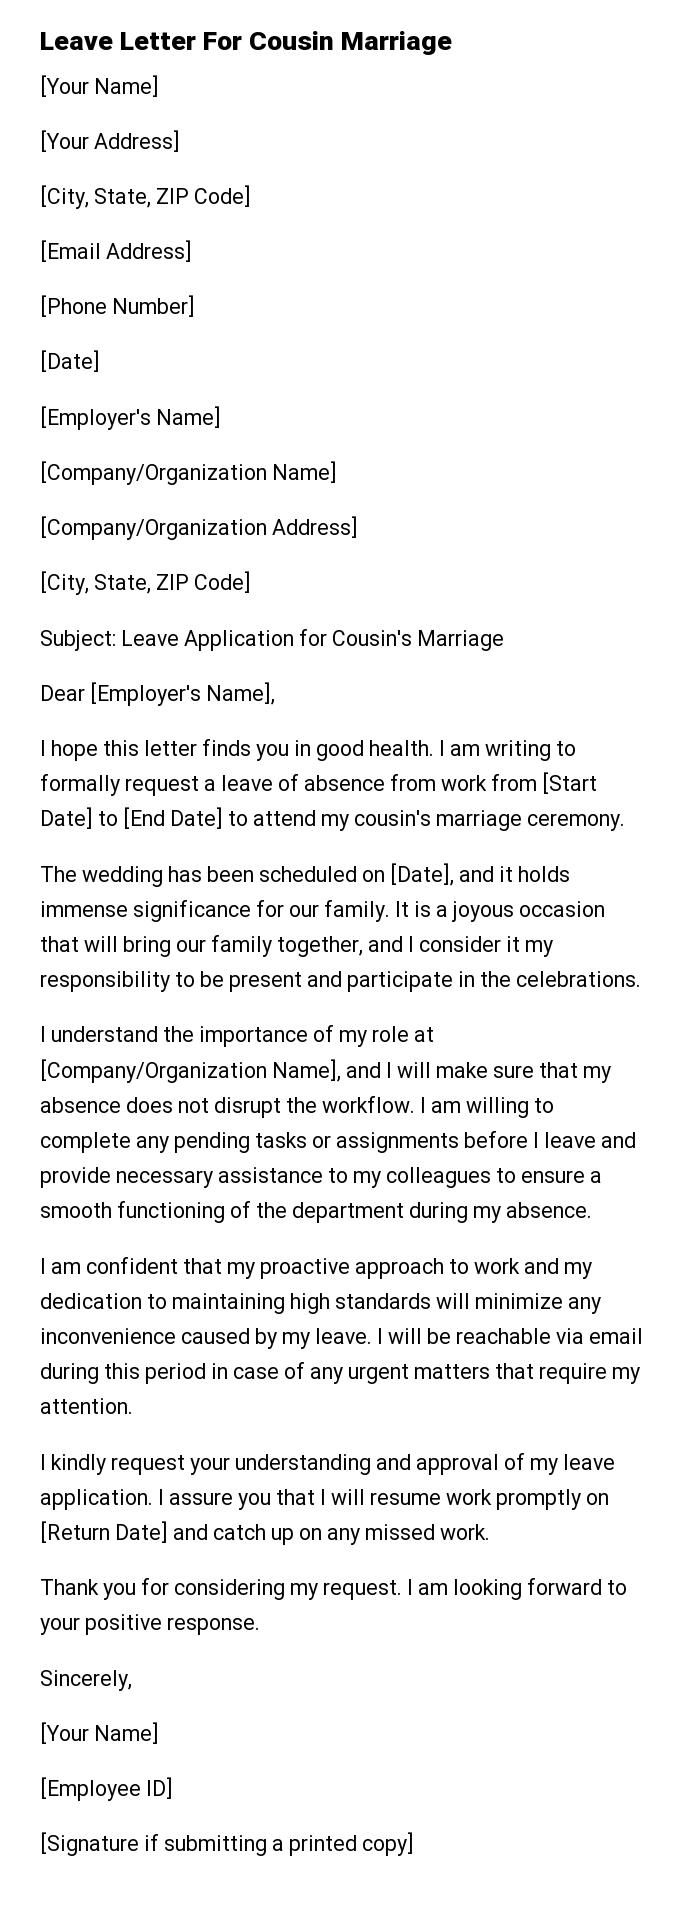 Leave Letter For Cousin Marriage